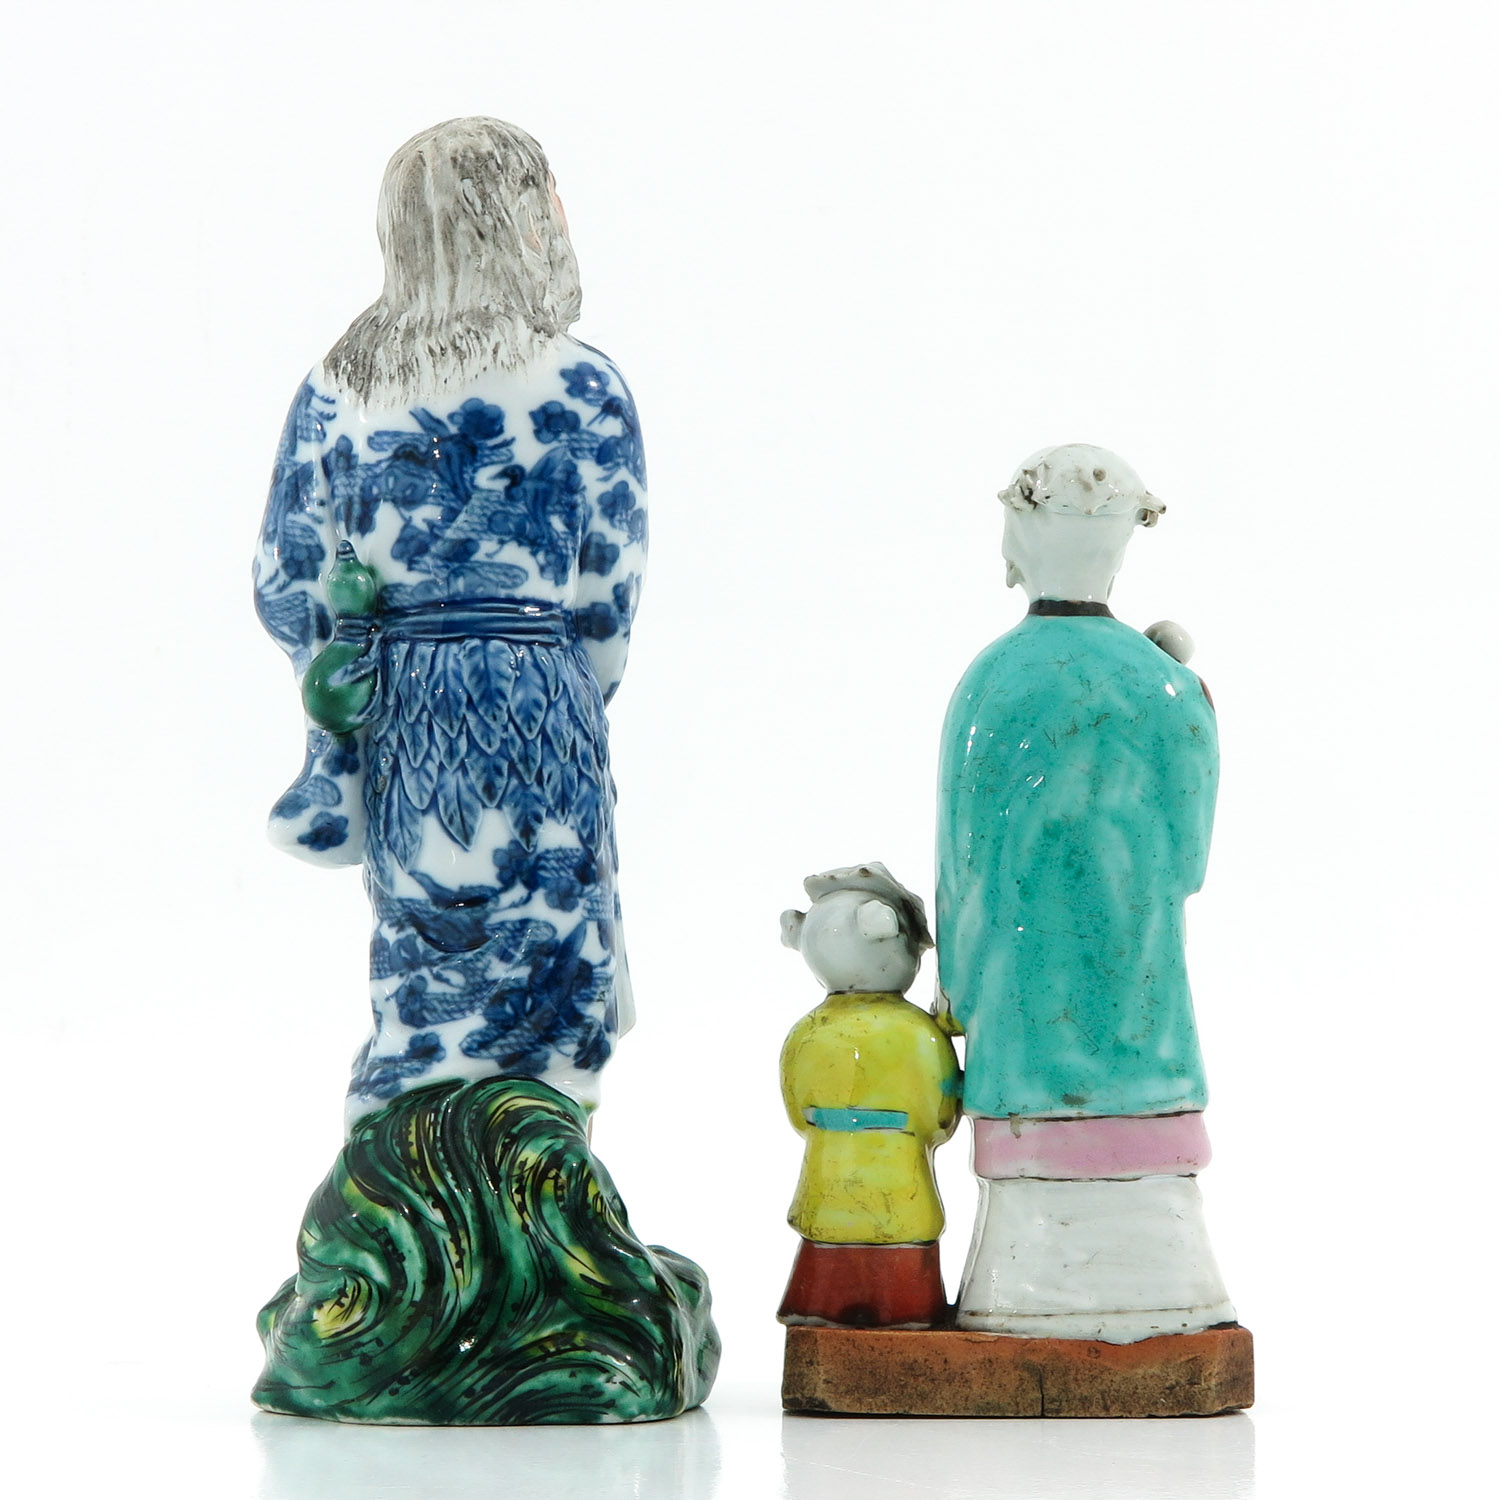 A Lot of 2 Chinese Porcelain Sculptures - Image 3 of 10